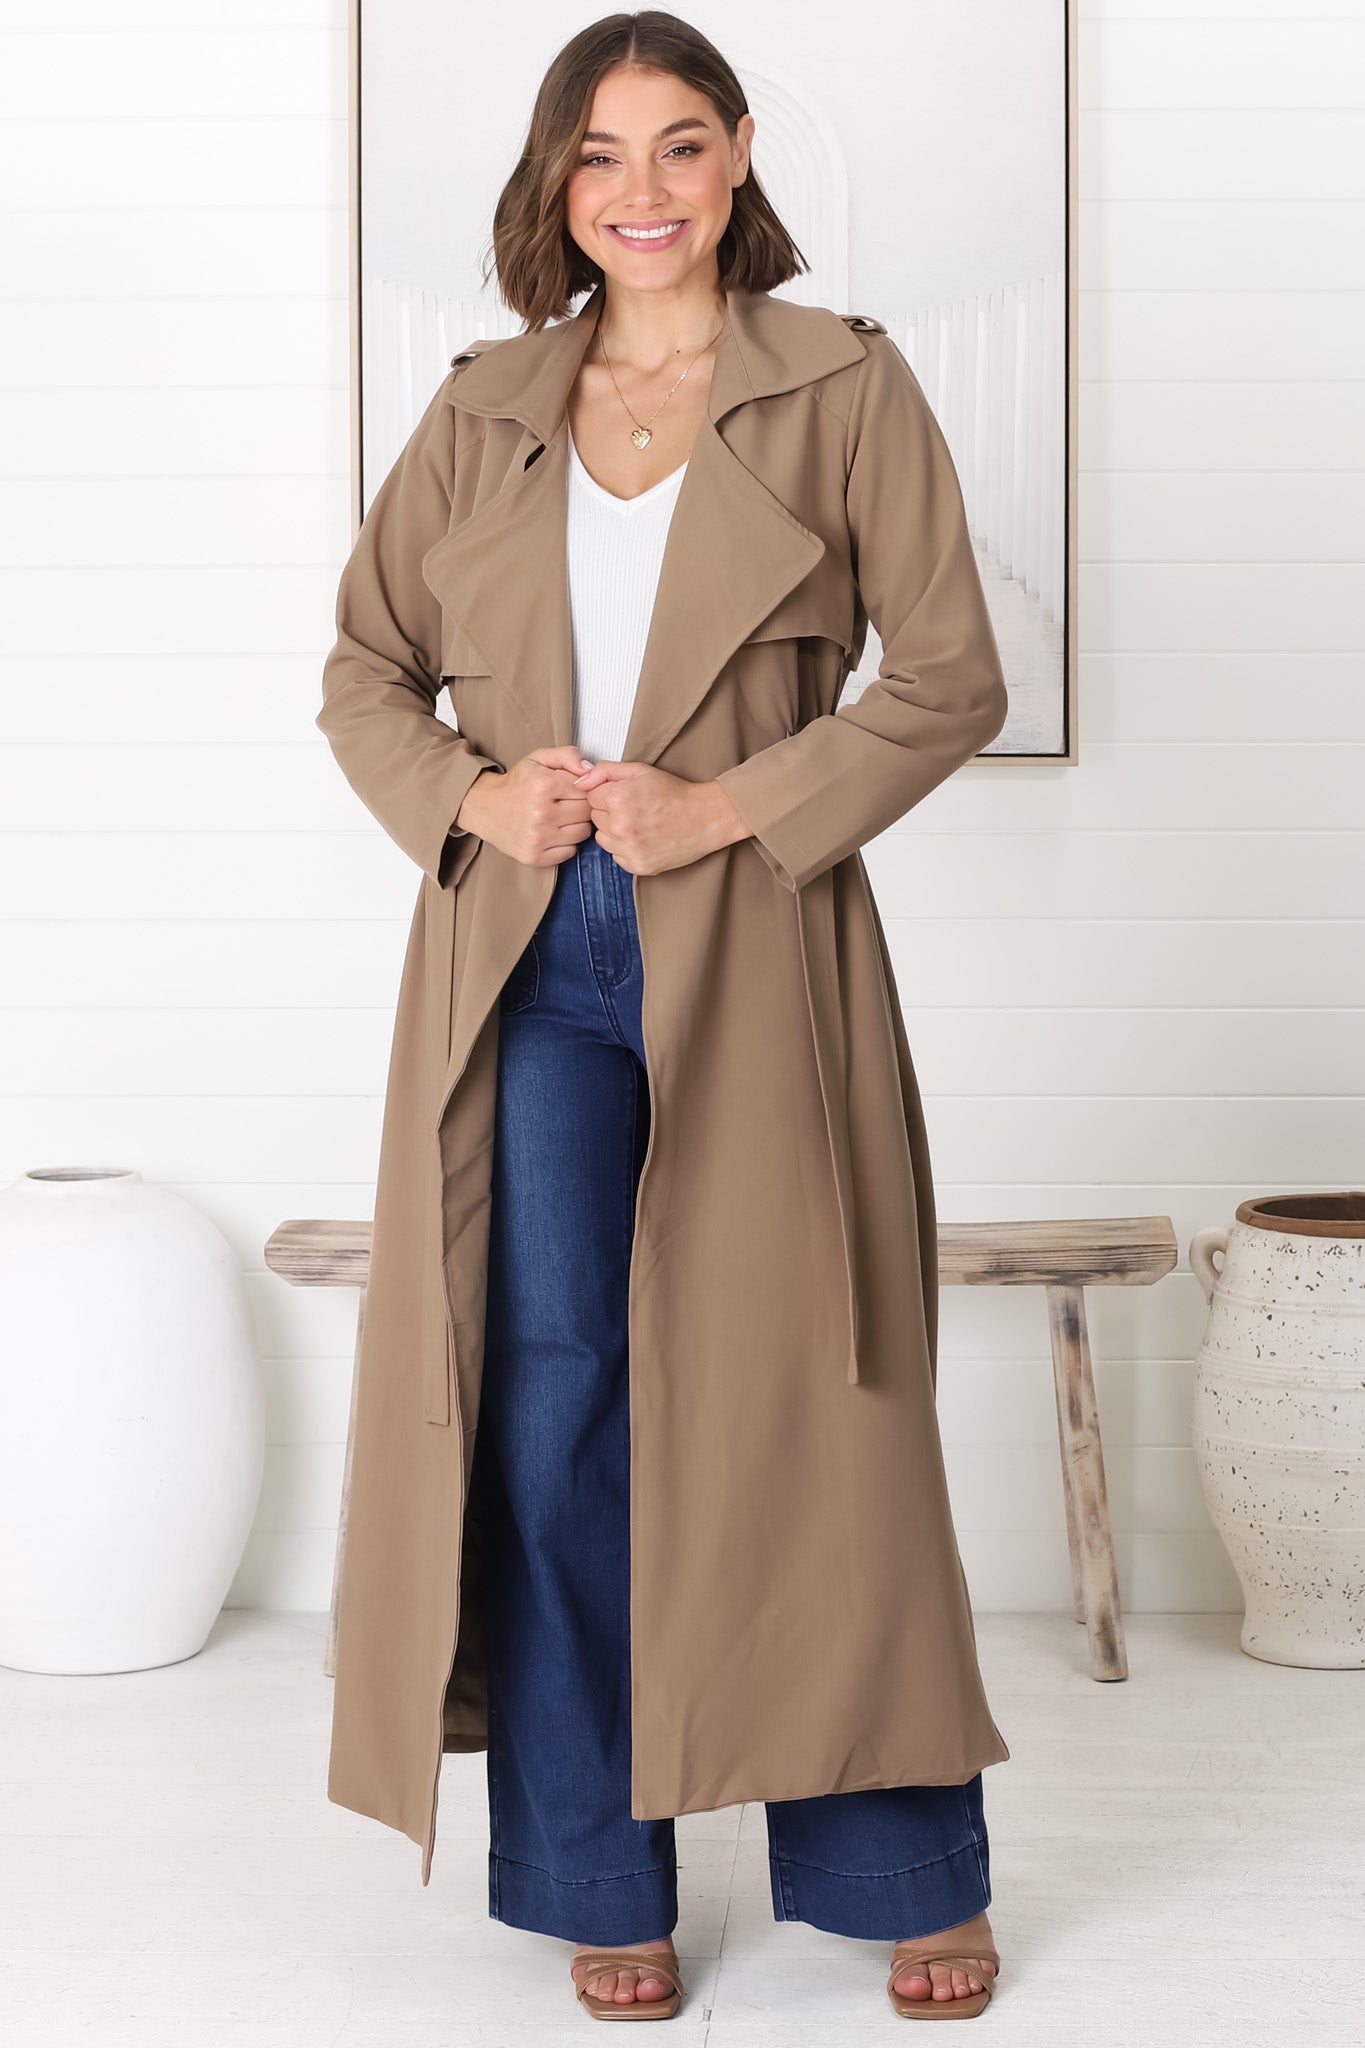 Belmore Trench Coat - Cinched Waist with Tie Coat in Taupe